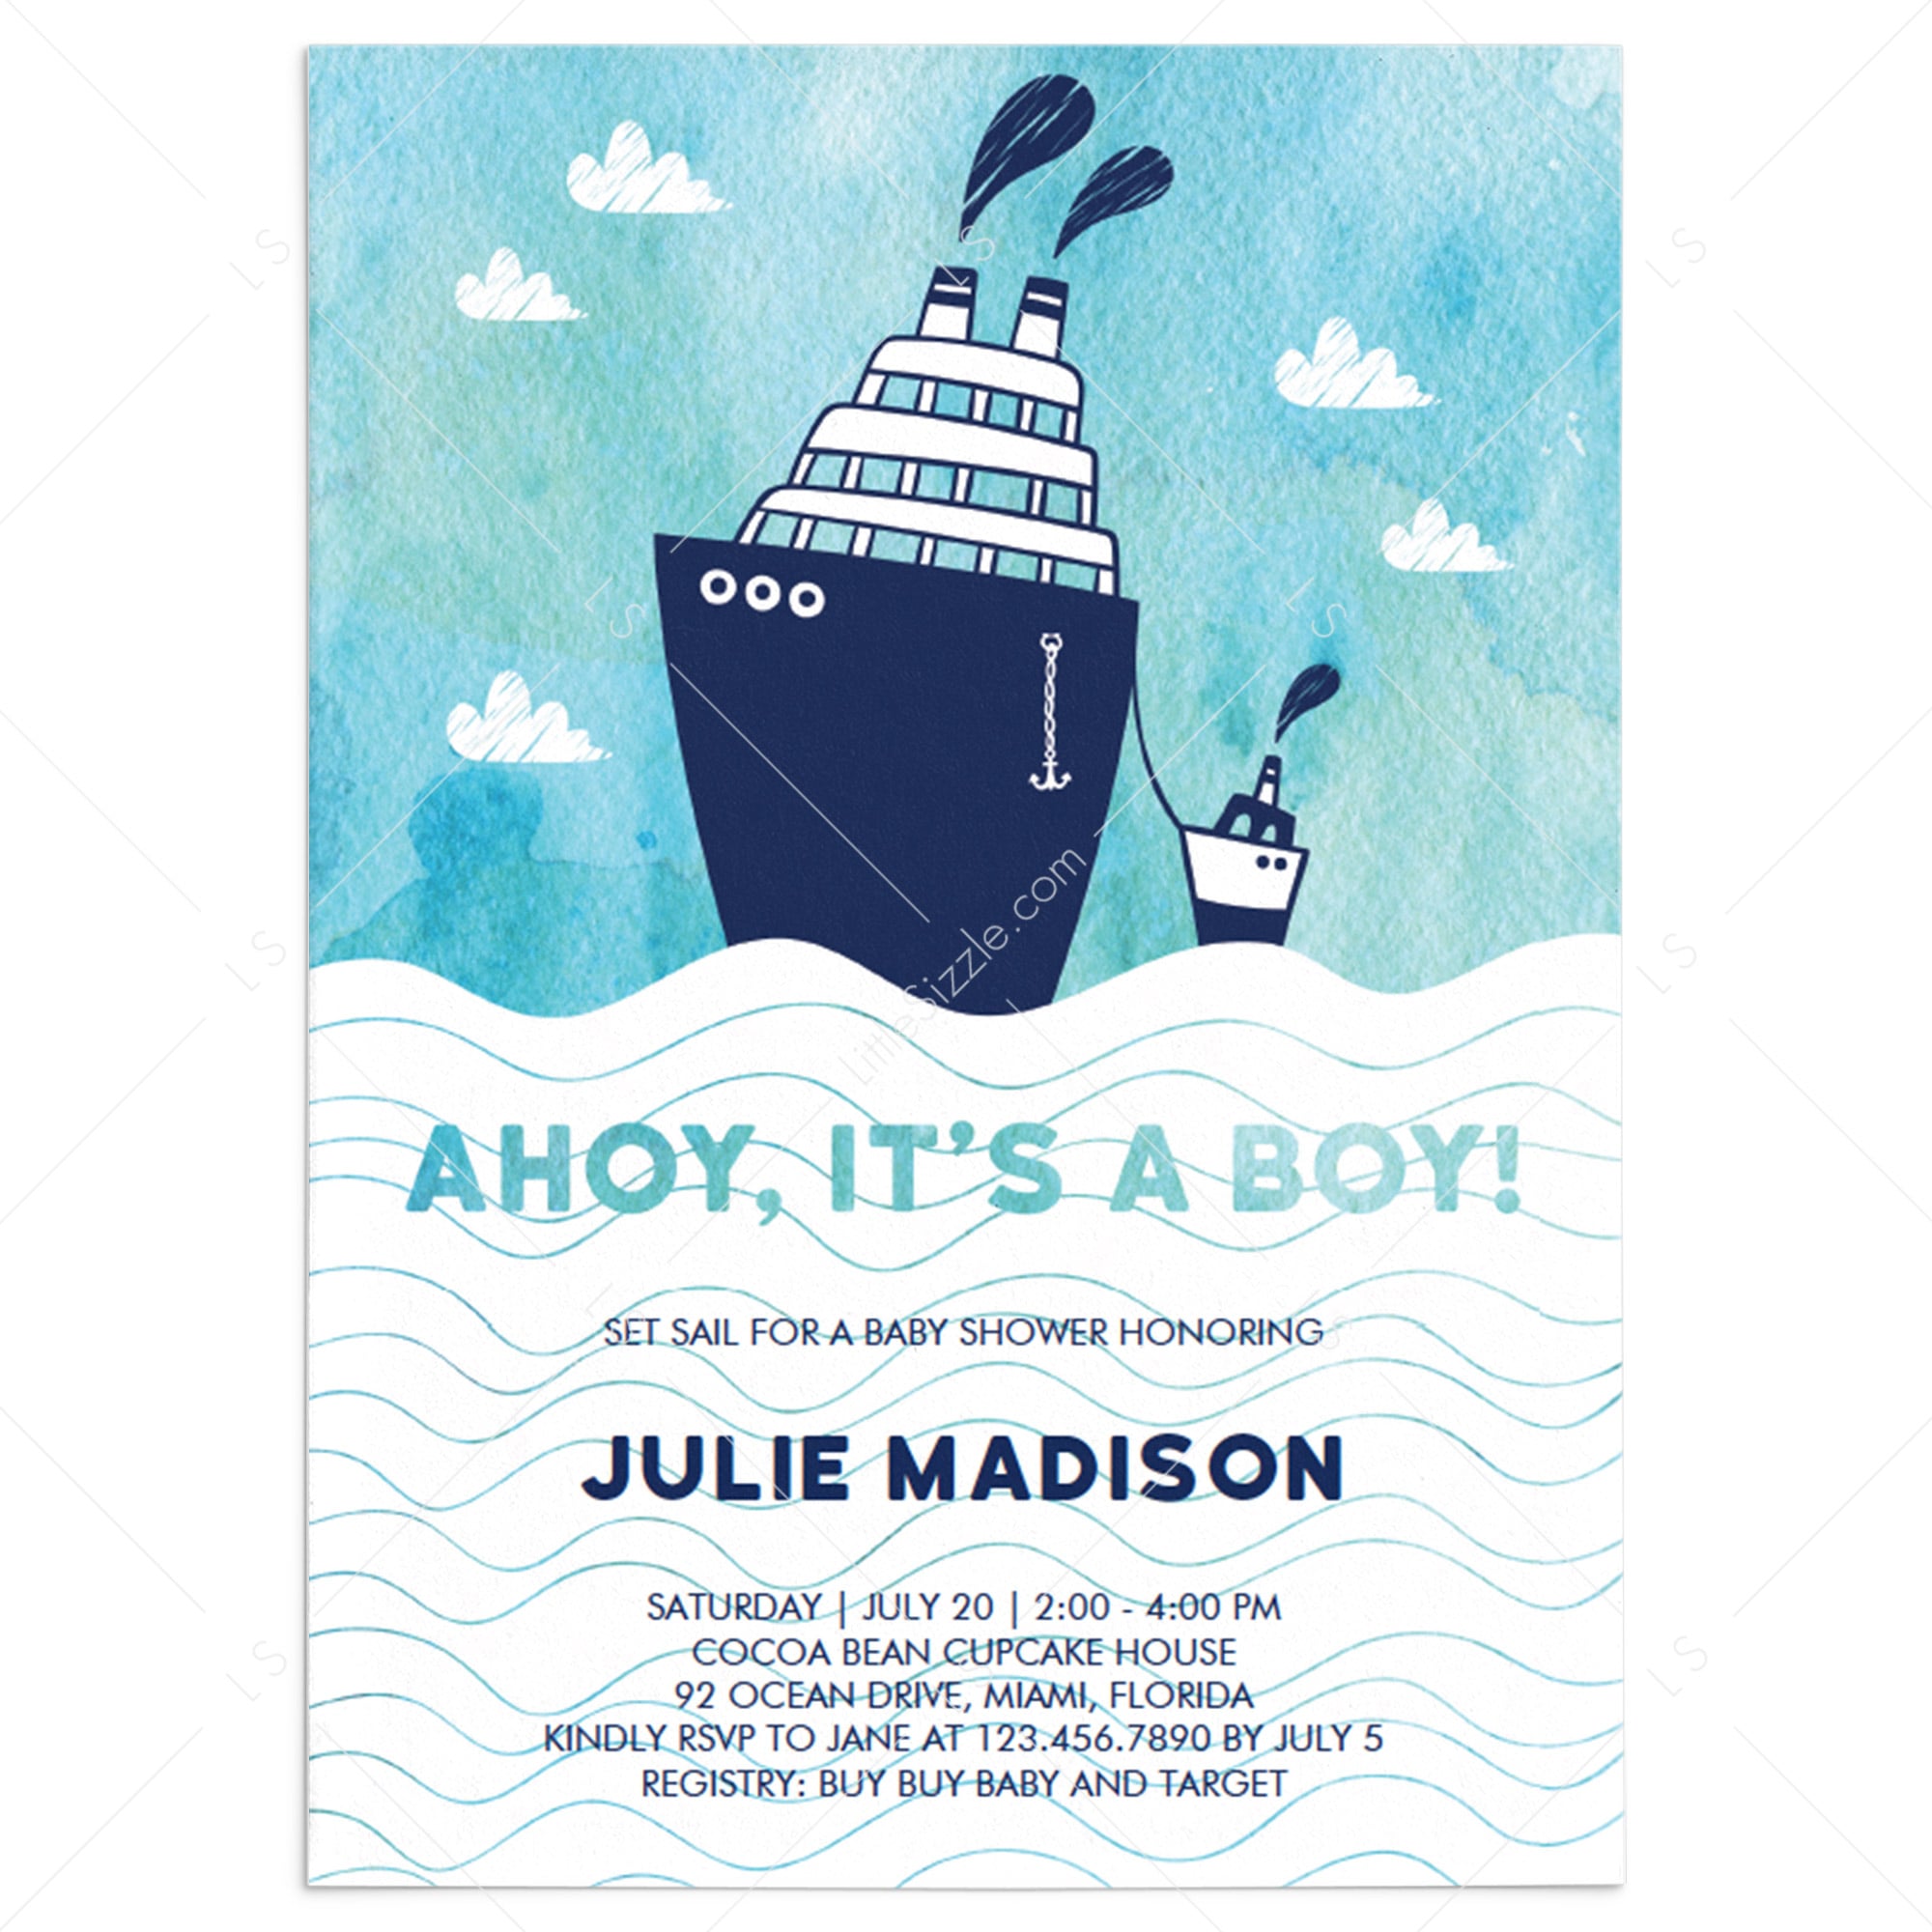 Ahoy its a boy baby shower invitation template DIY by LittleSizzle